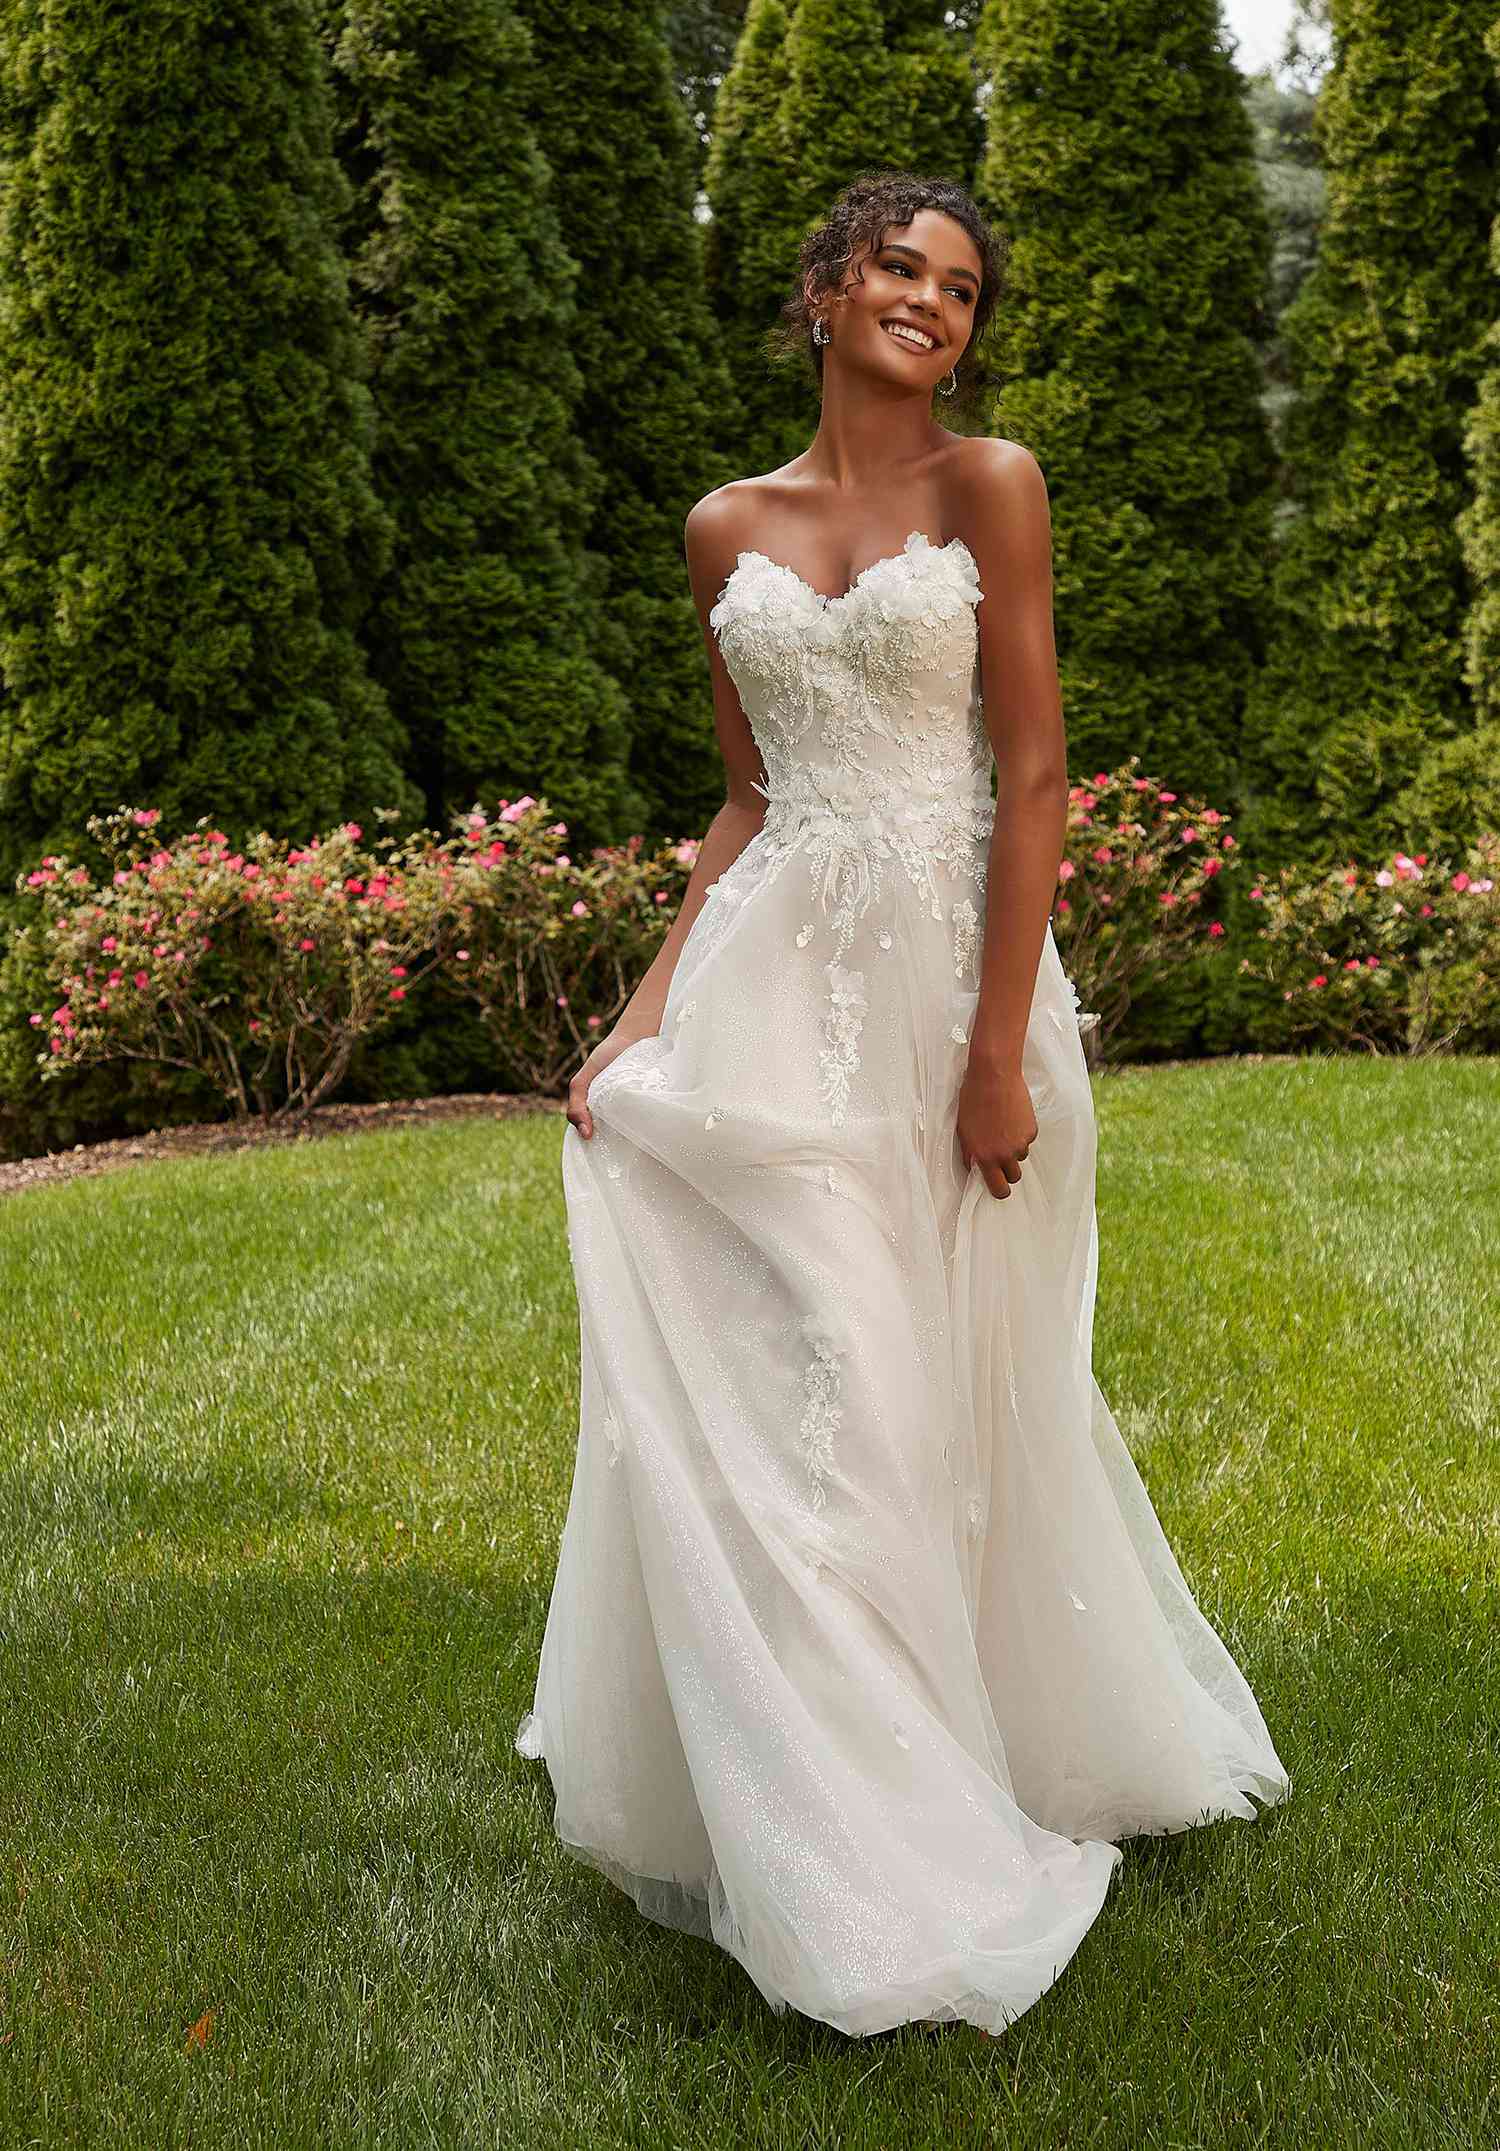 Model wearing a strapless tulle and floral wedding dress